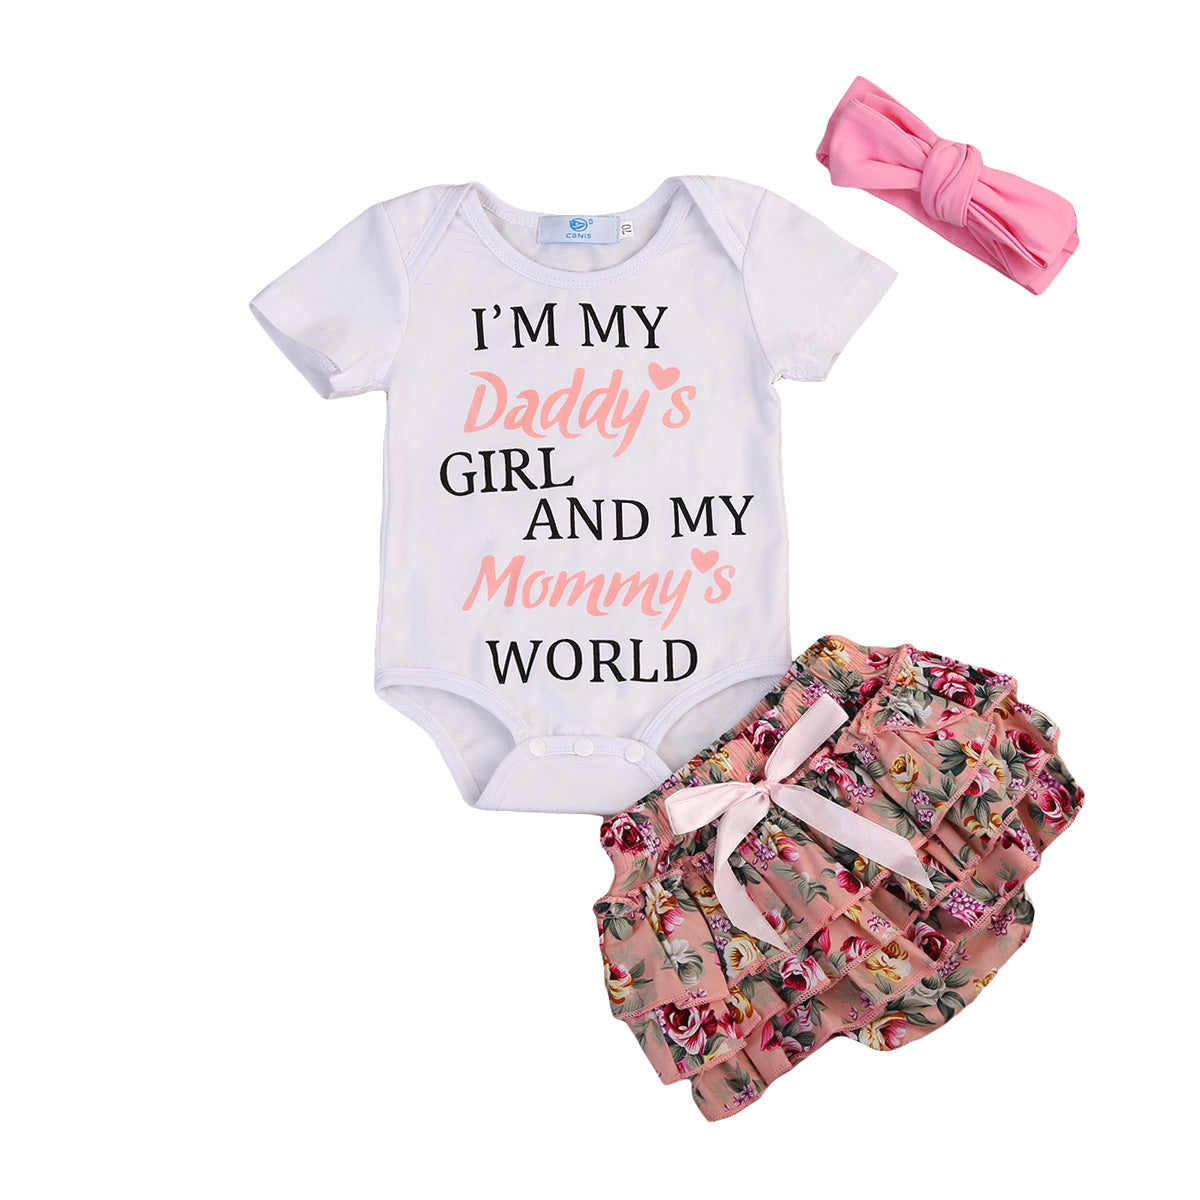 Baby Girls Onesie + Floral Shorts +Headband Outfit